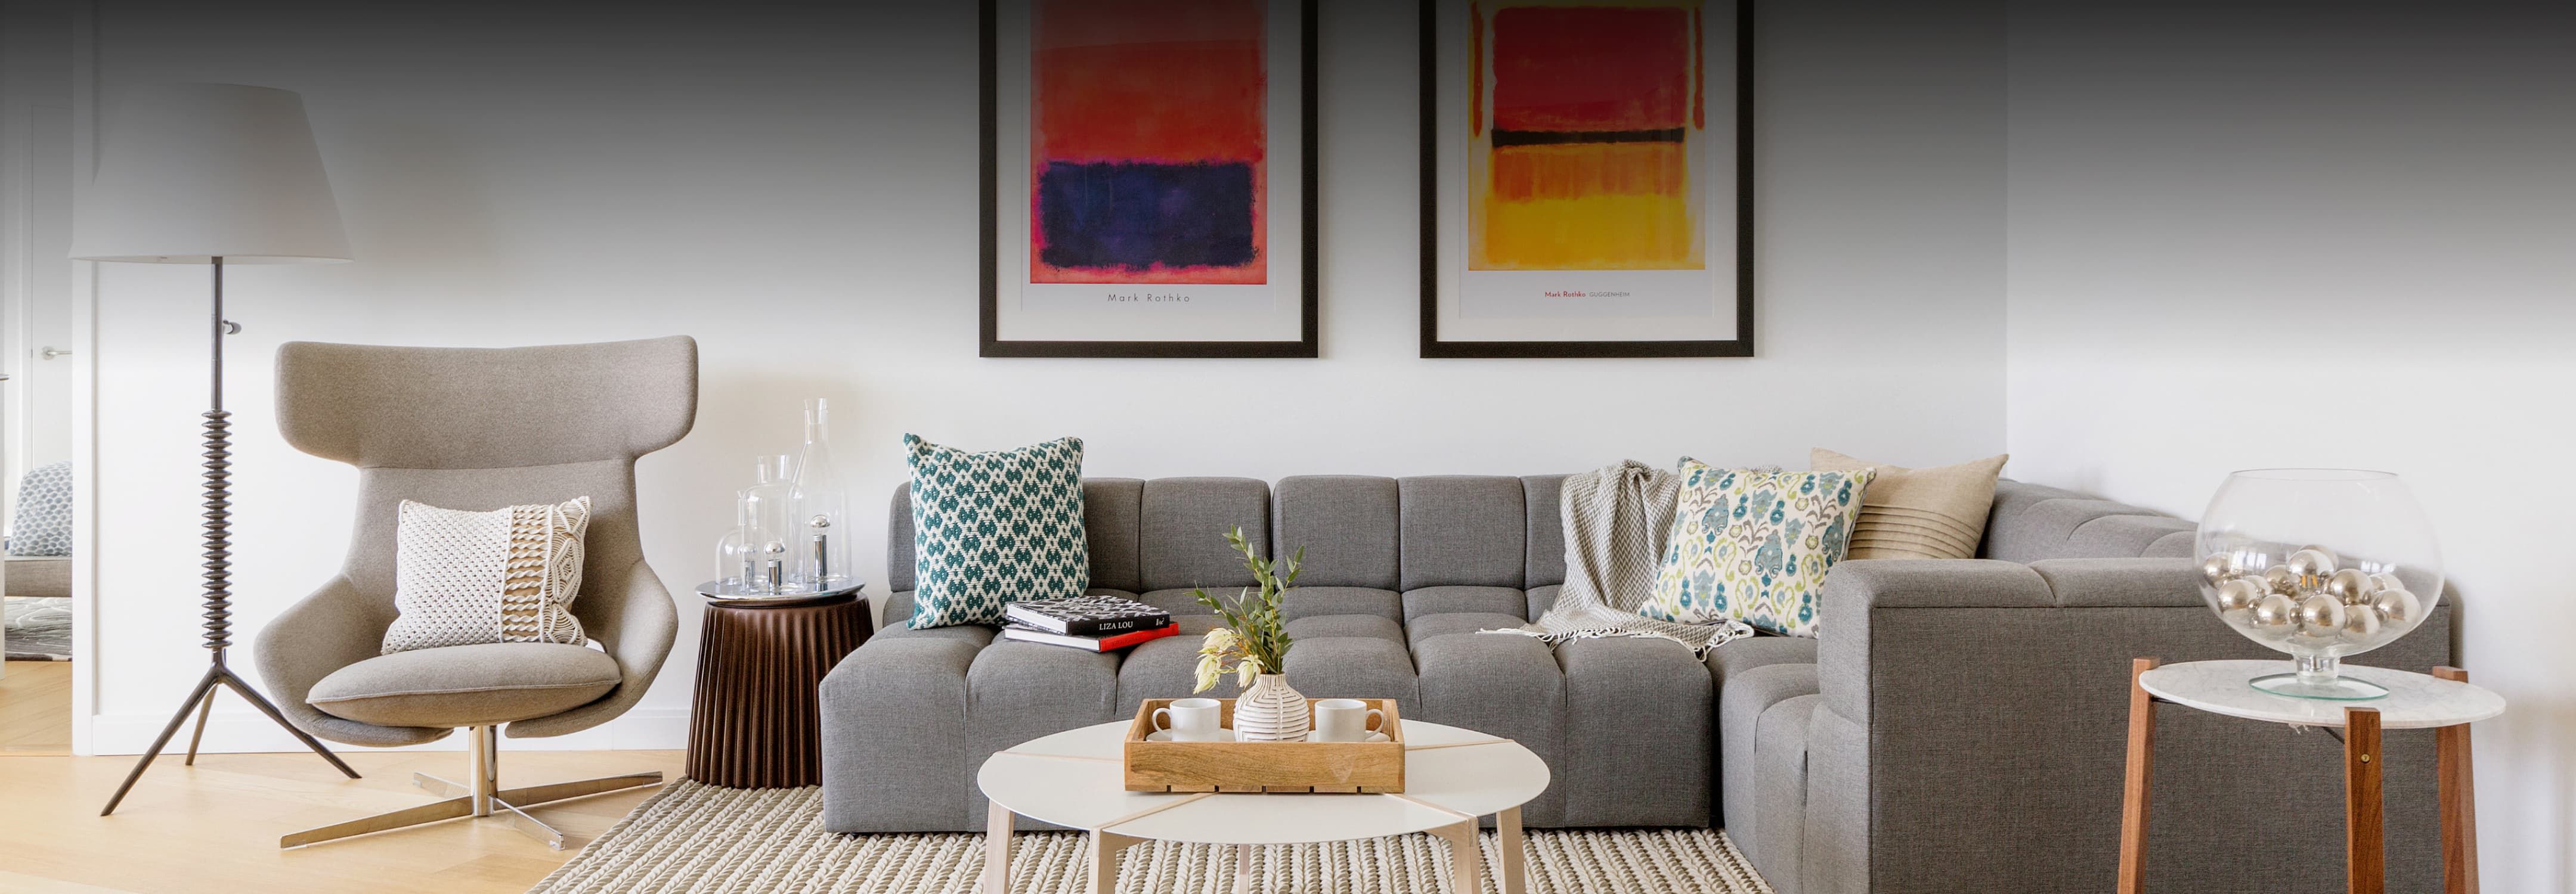 Stylish living room with a gray couch, modern art pieces, and chic decor.